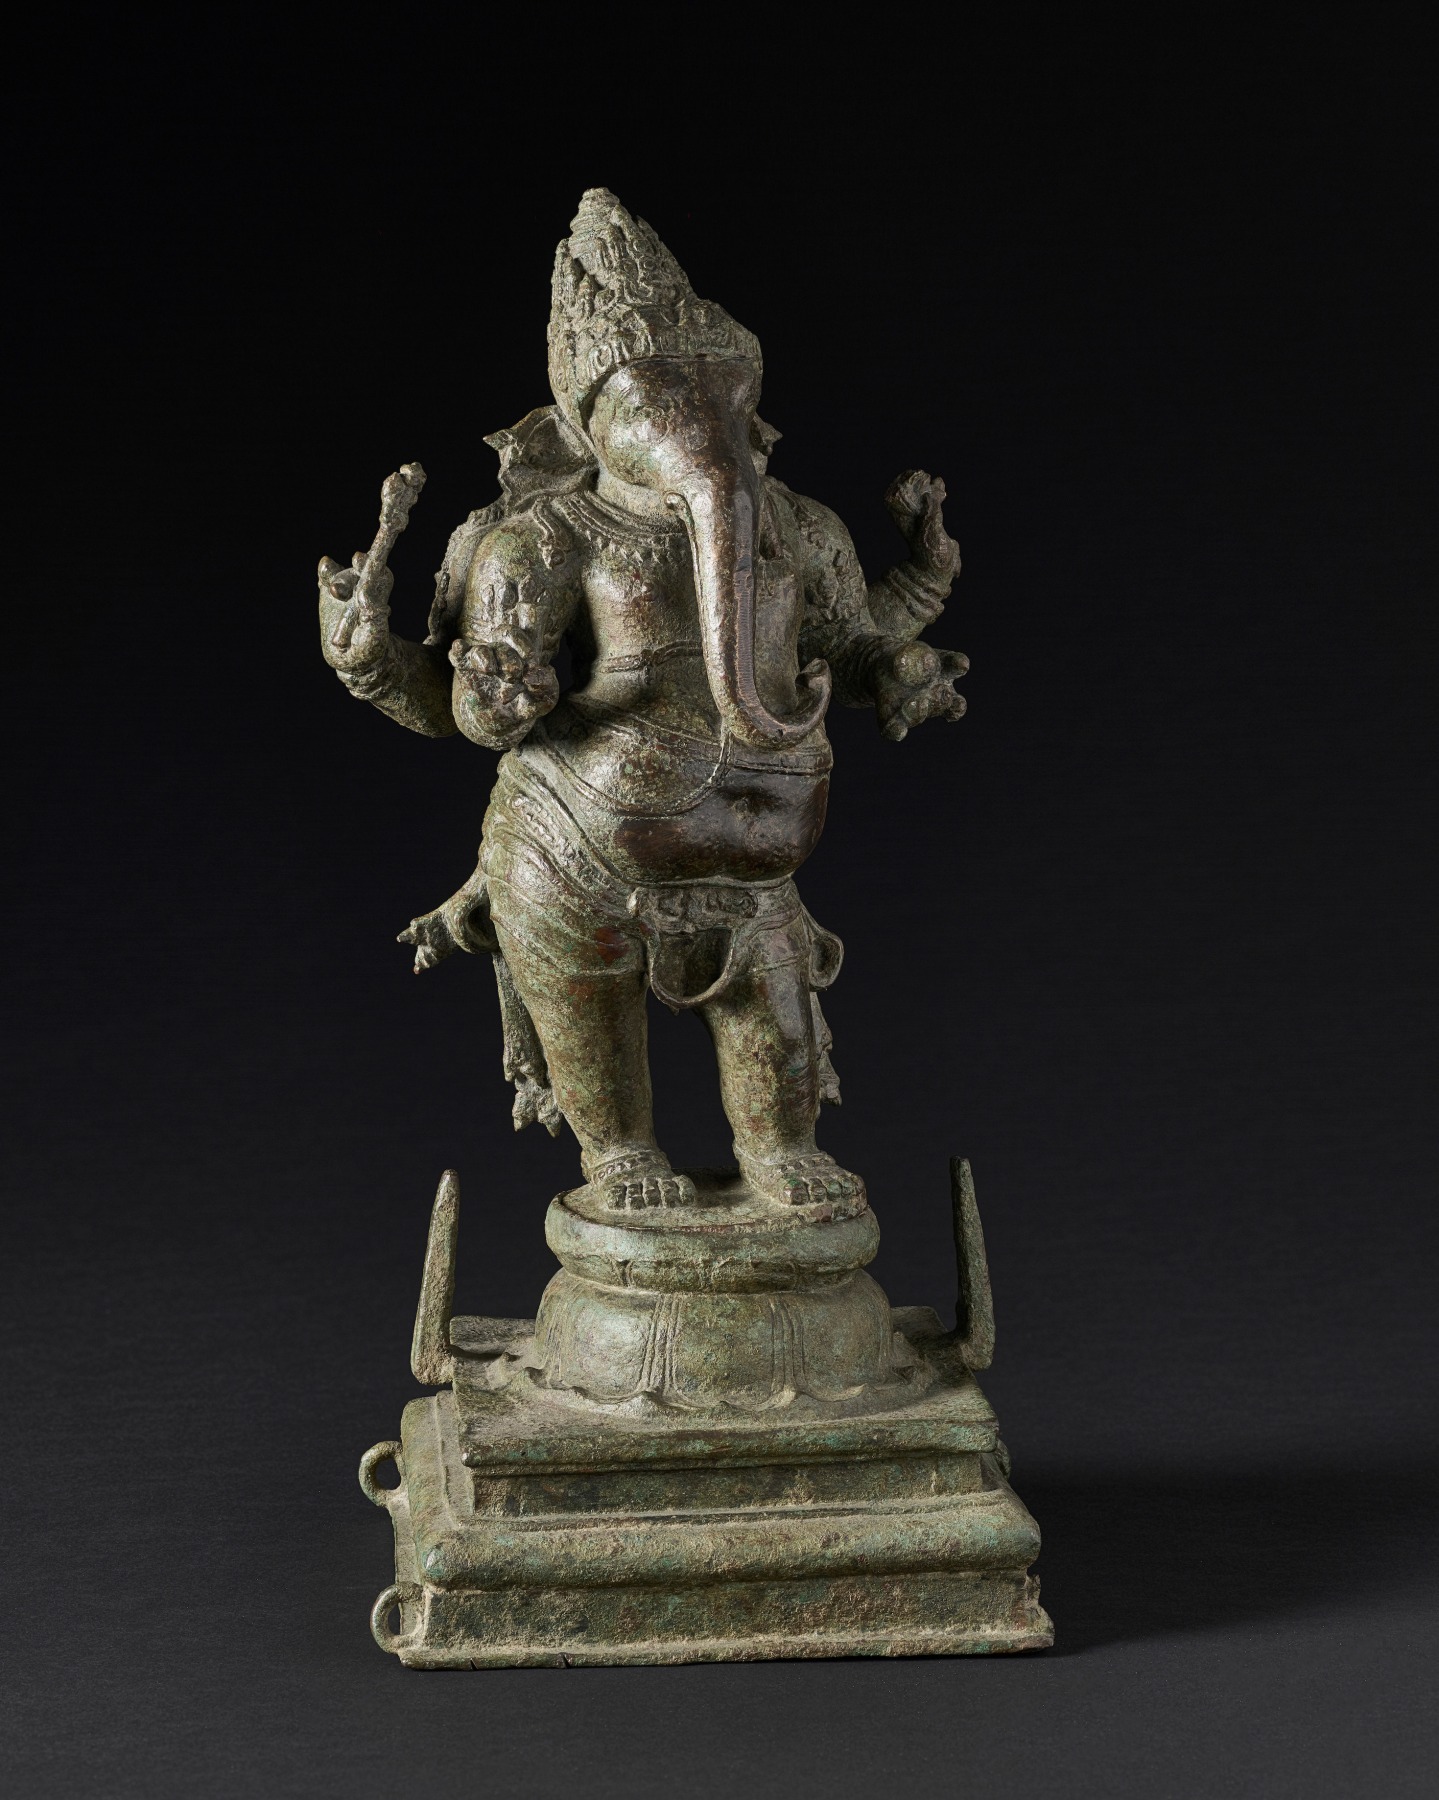 In this charming sculpture, Ganesha stands in bulging contrapposto atop a circular lotus supported by a molded square base with lugs on the sides and vertical pegs. 